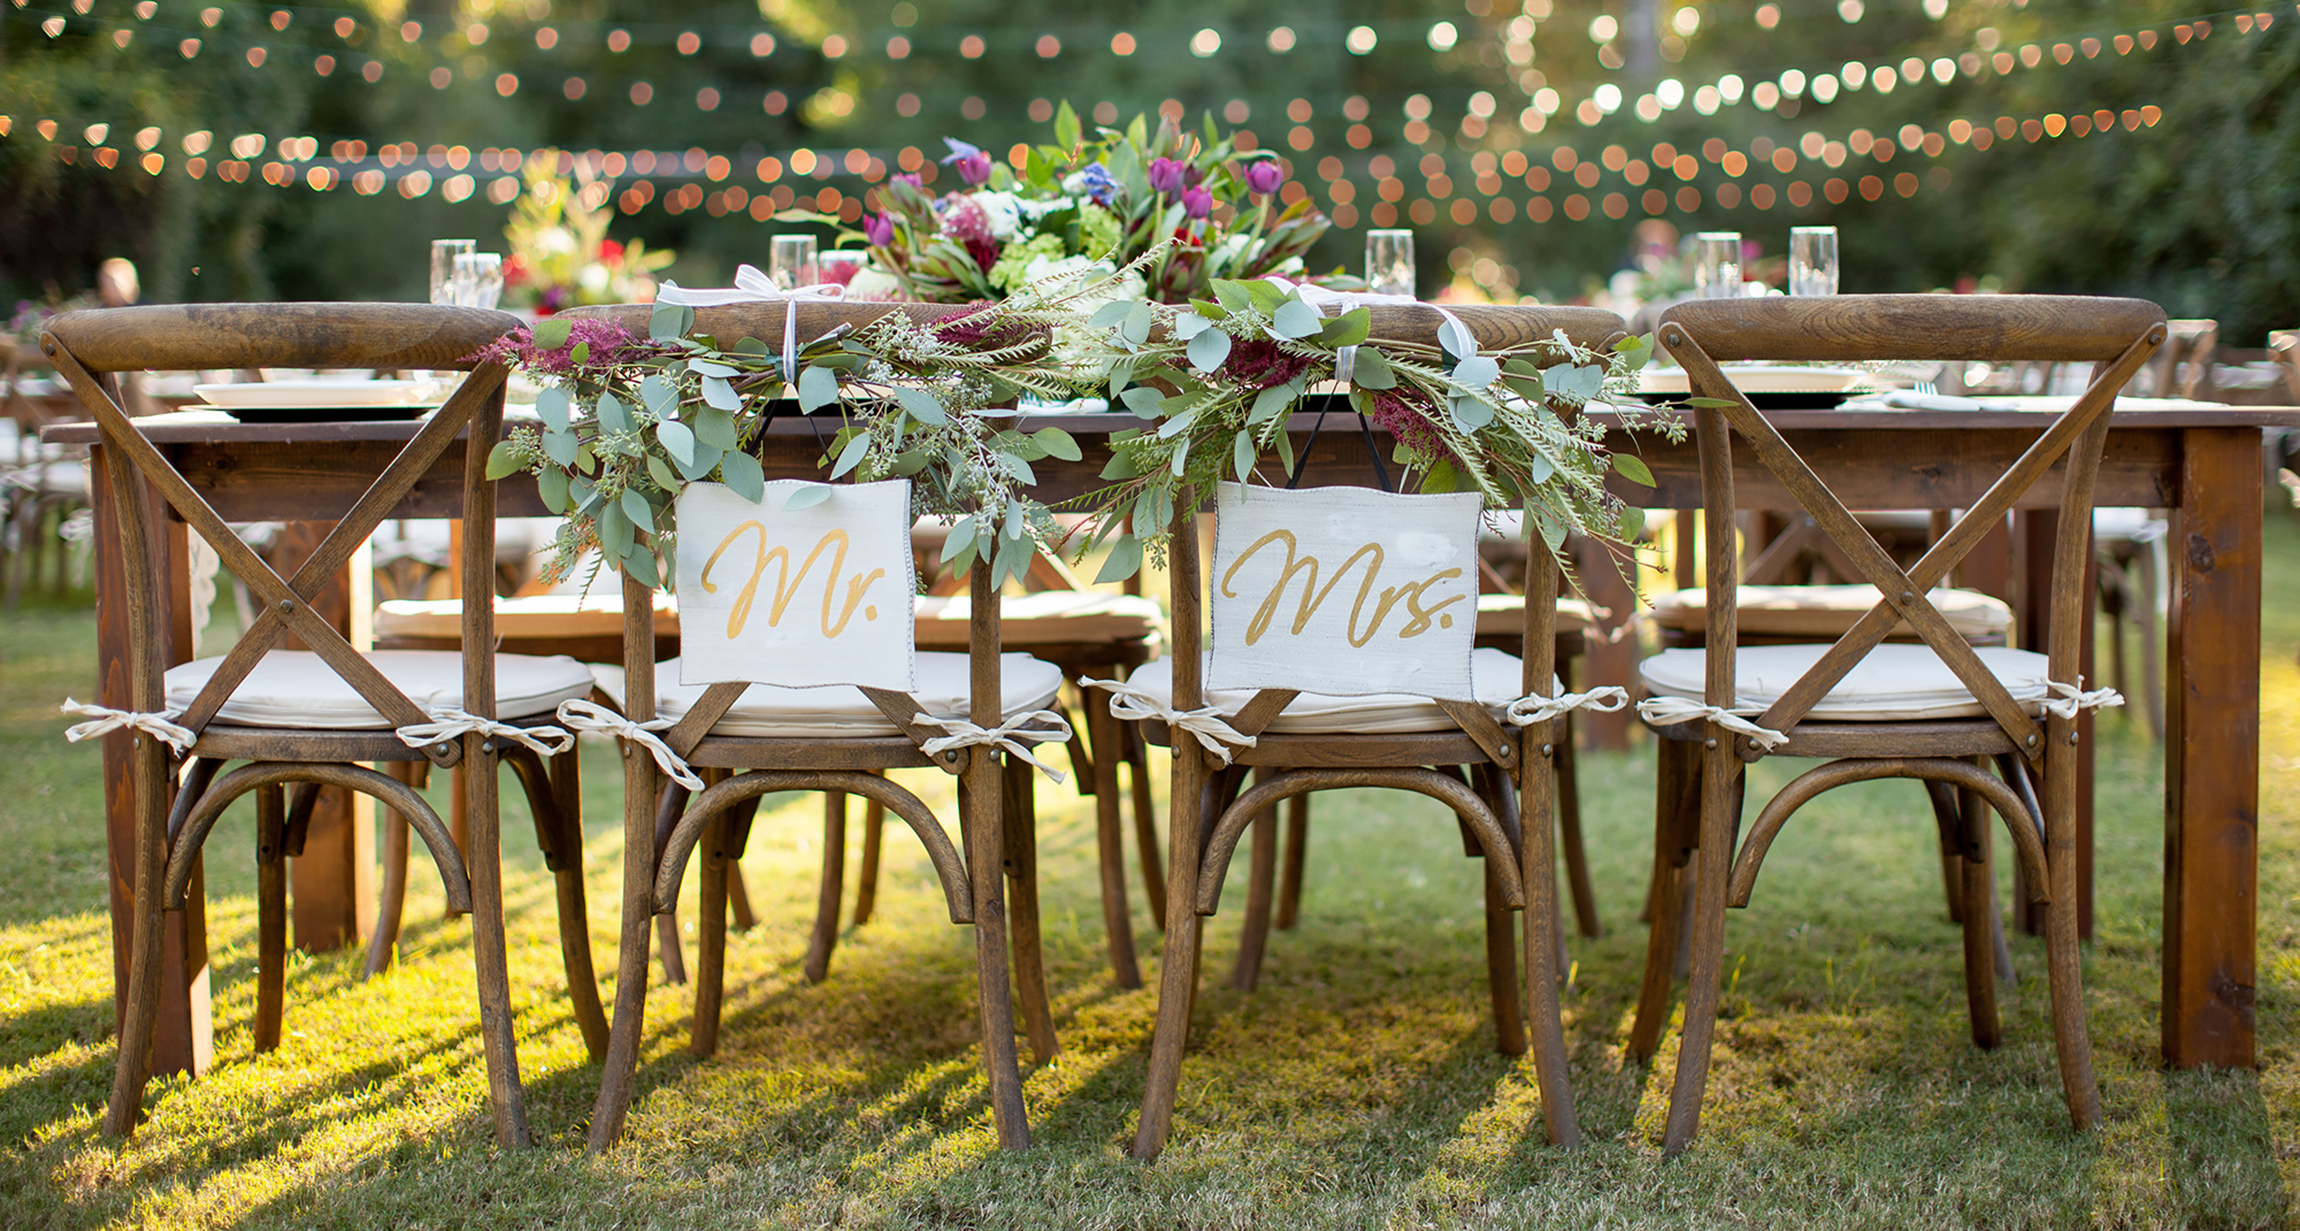 Farm Table Rentals, Rustic Wedding Chairs Rental in South Florida